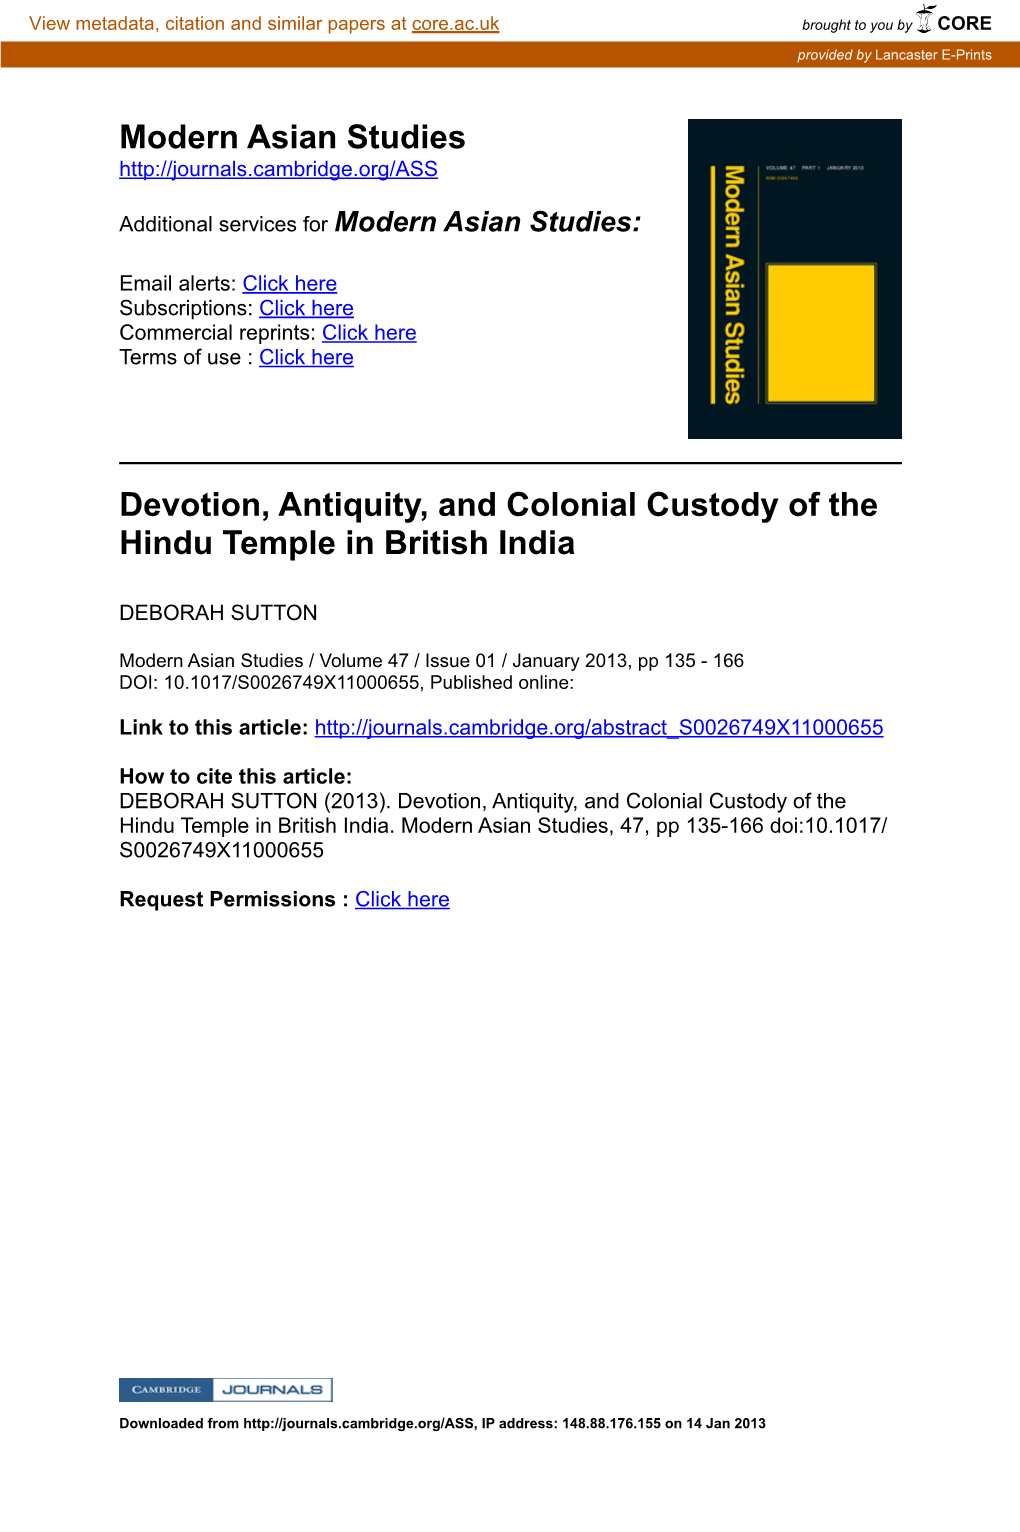 Modern Asian Studies Devotion, Antiquity, and Colonial Custody Of